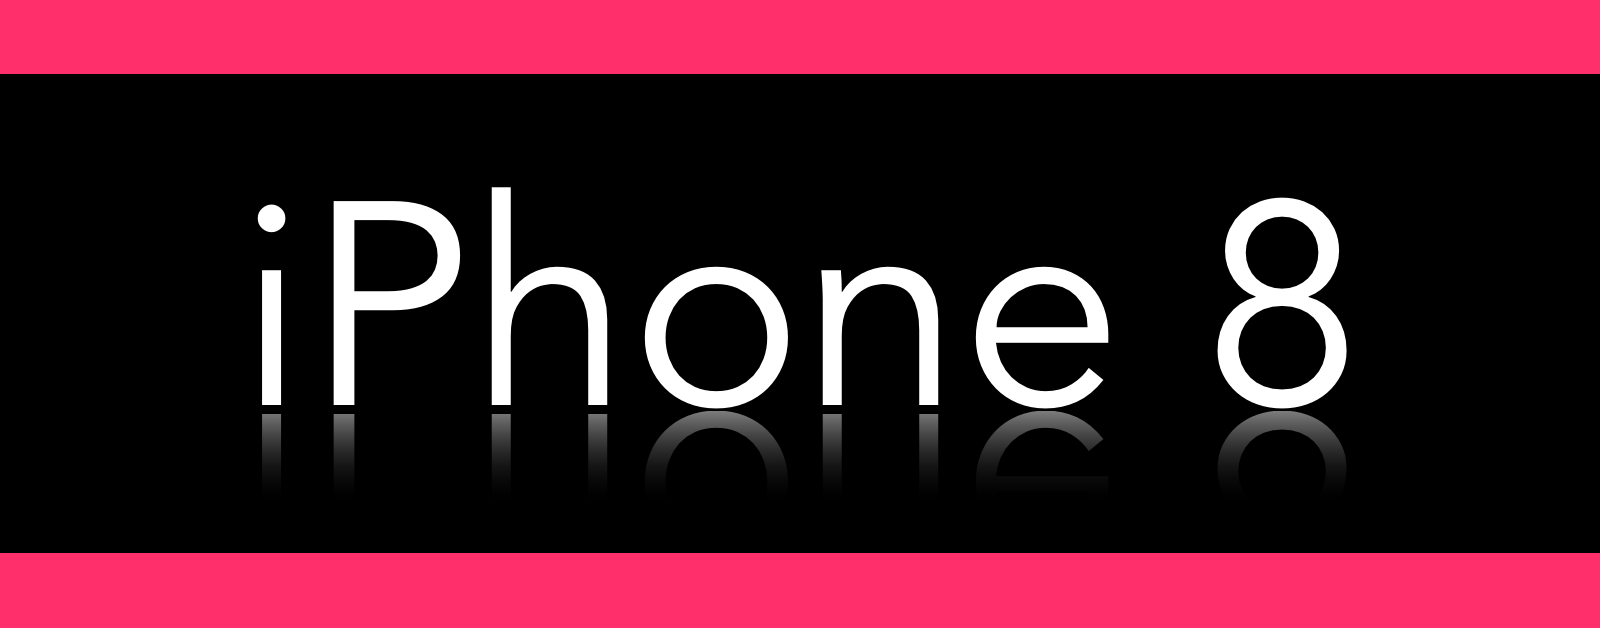 iPhone 8 Logo - A Bezel-less iPhone 8 Will Change How Photos Look - The Mac Observer